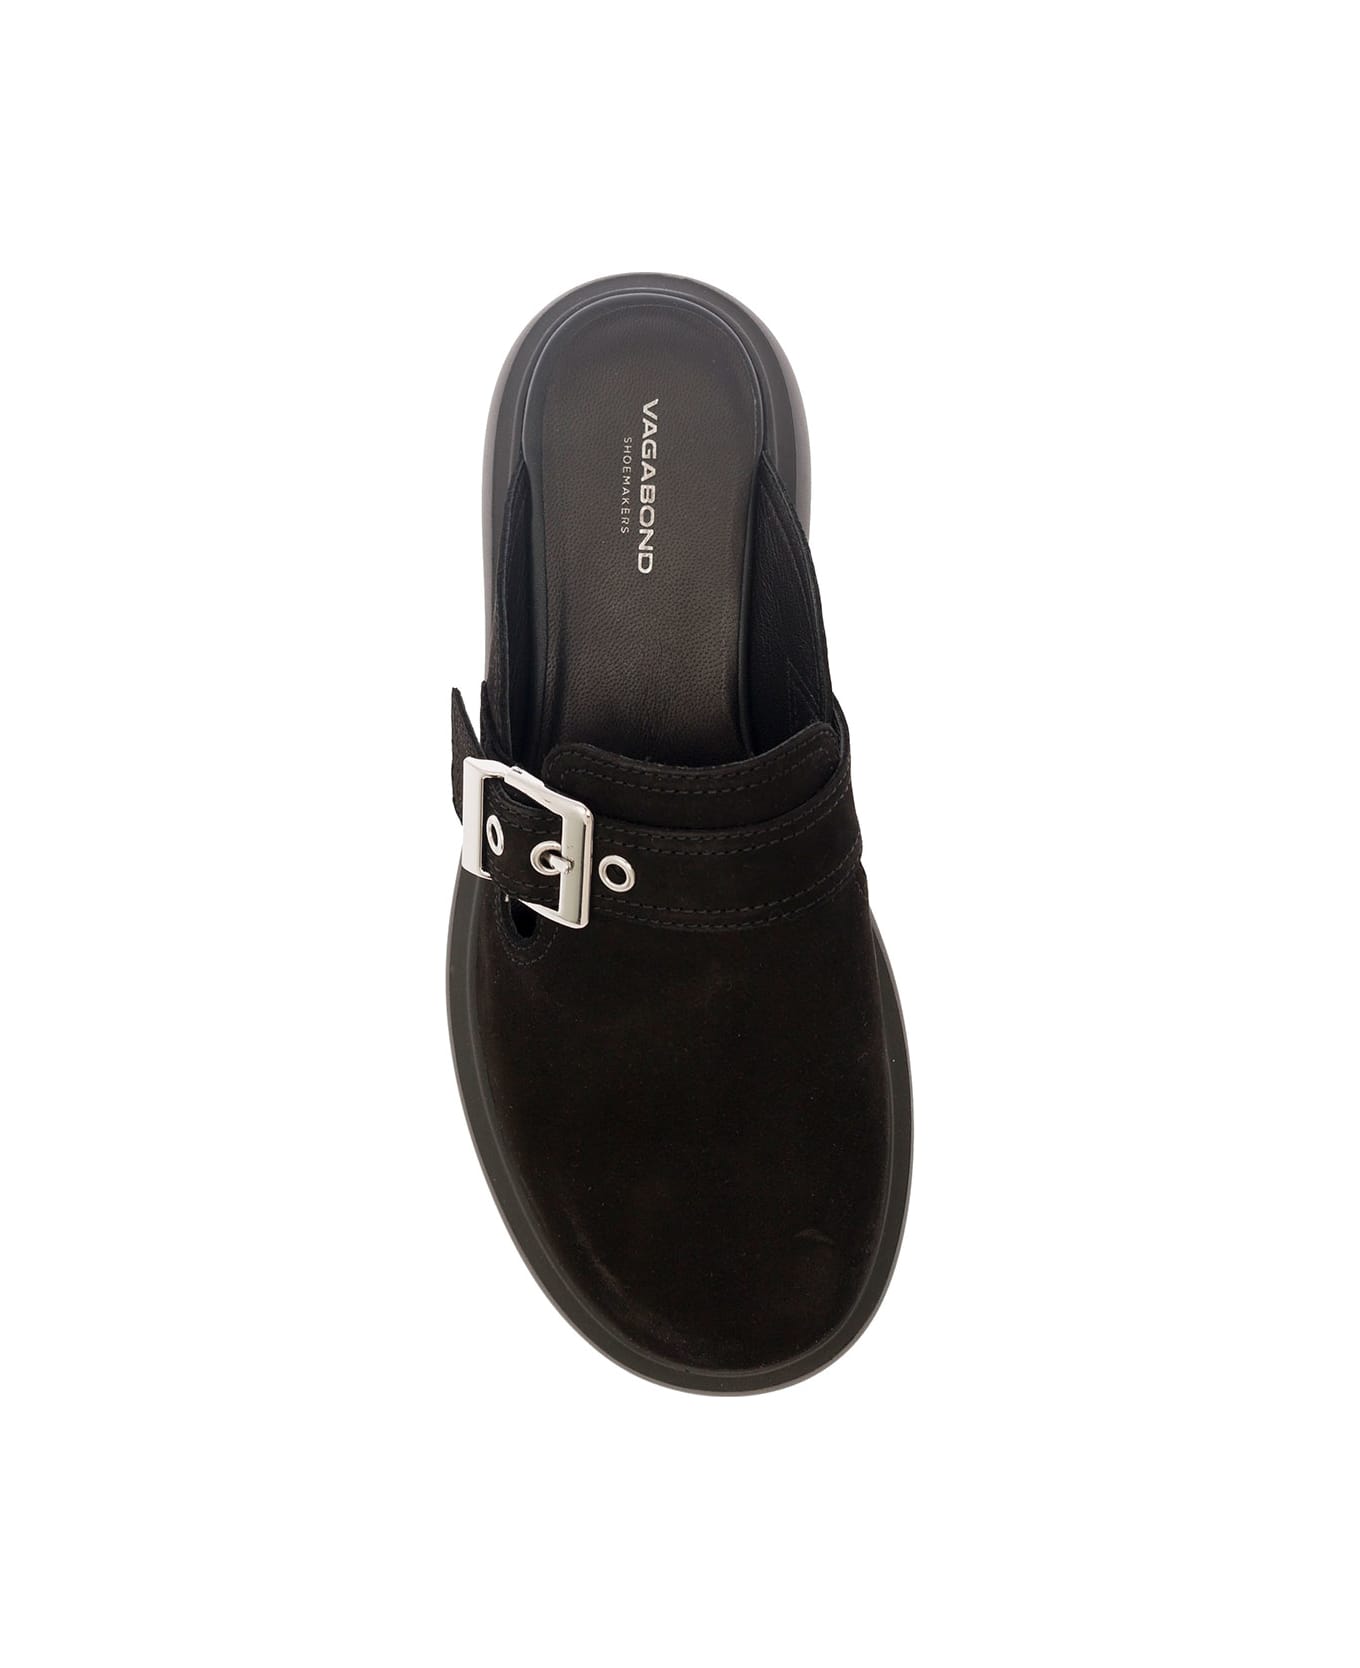 Vagabond 'blenda' Mules With A Buckle In Leather Woman - Black フラットシューズ